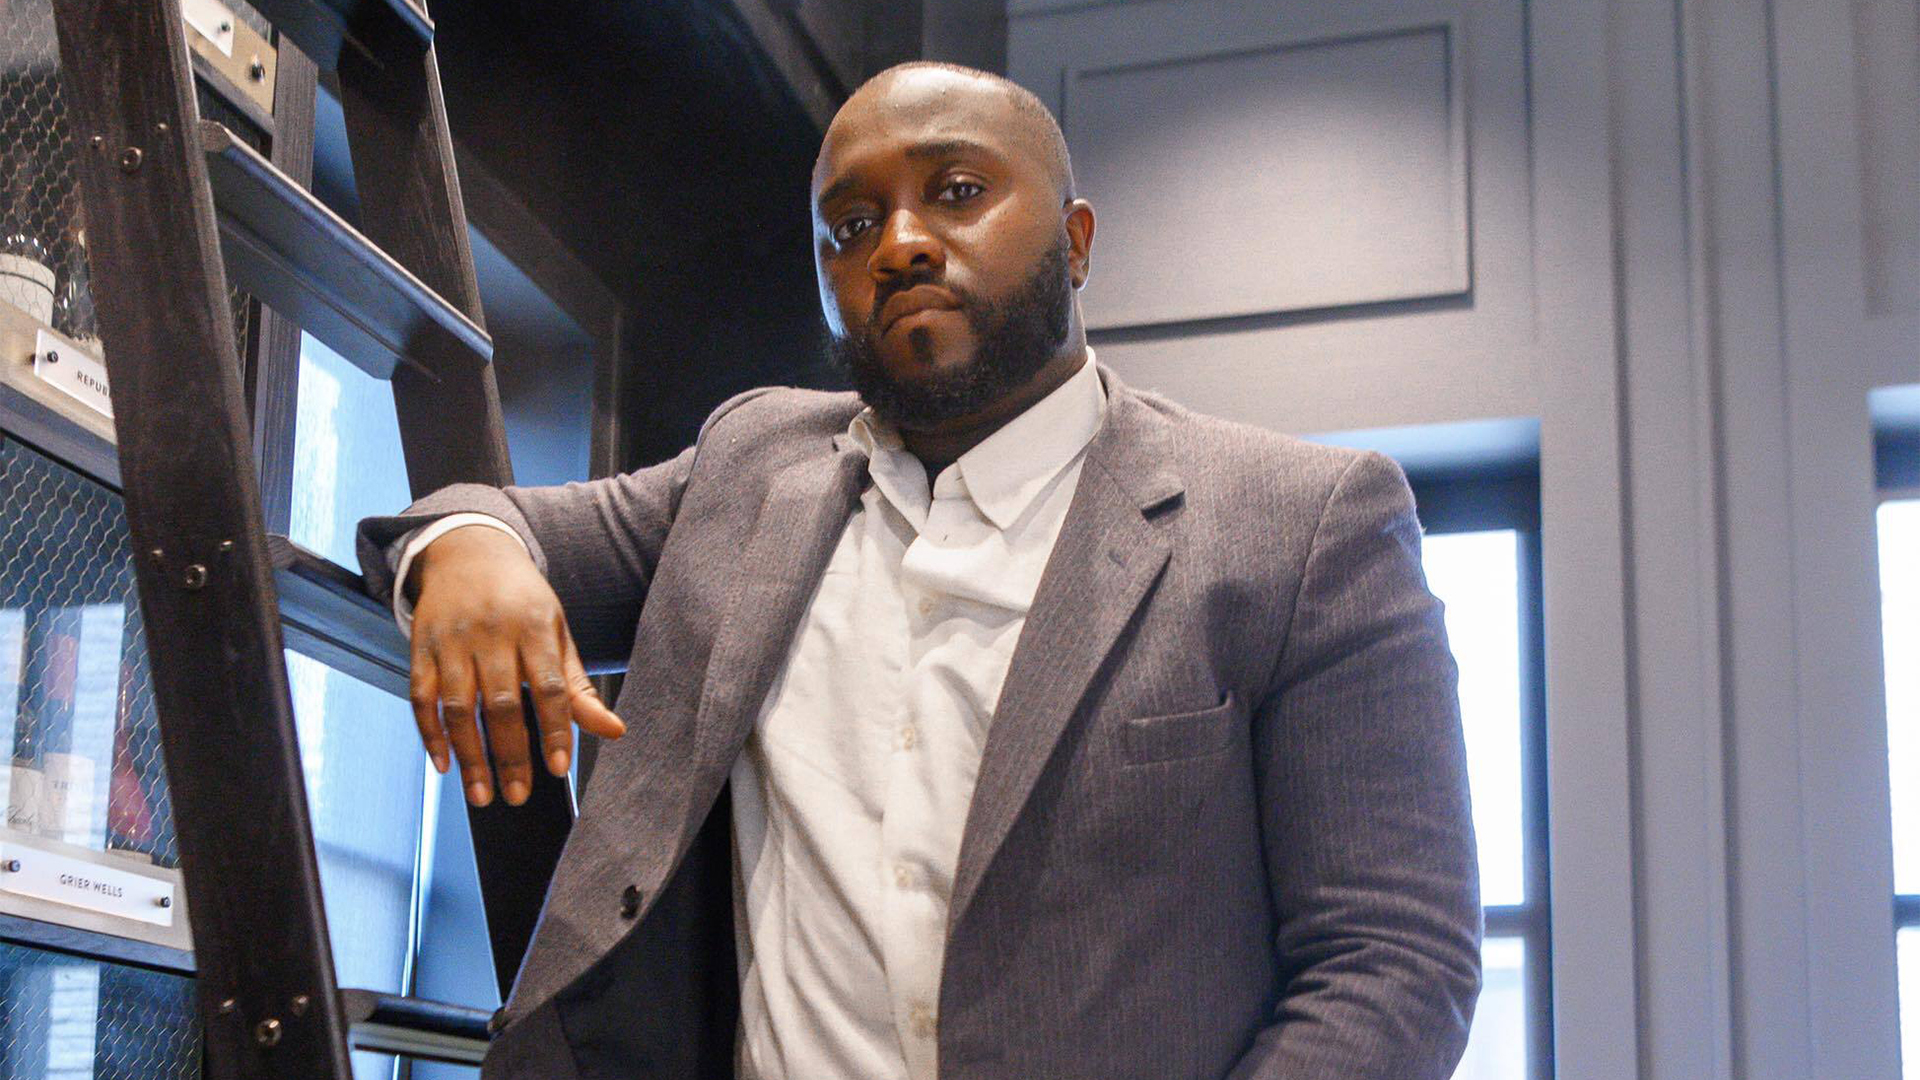 With Elev8 Ventures, Founder Tunji Fadiora Plans To Take Minority Founders To The Next Level